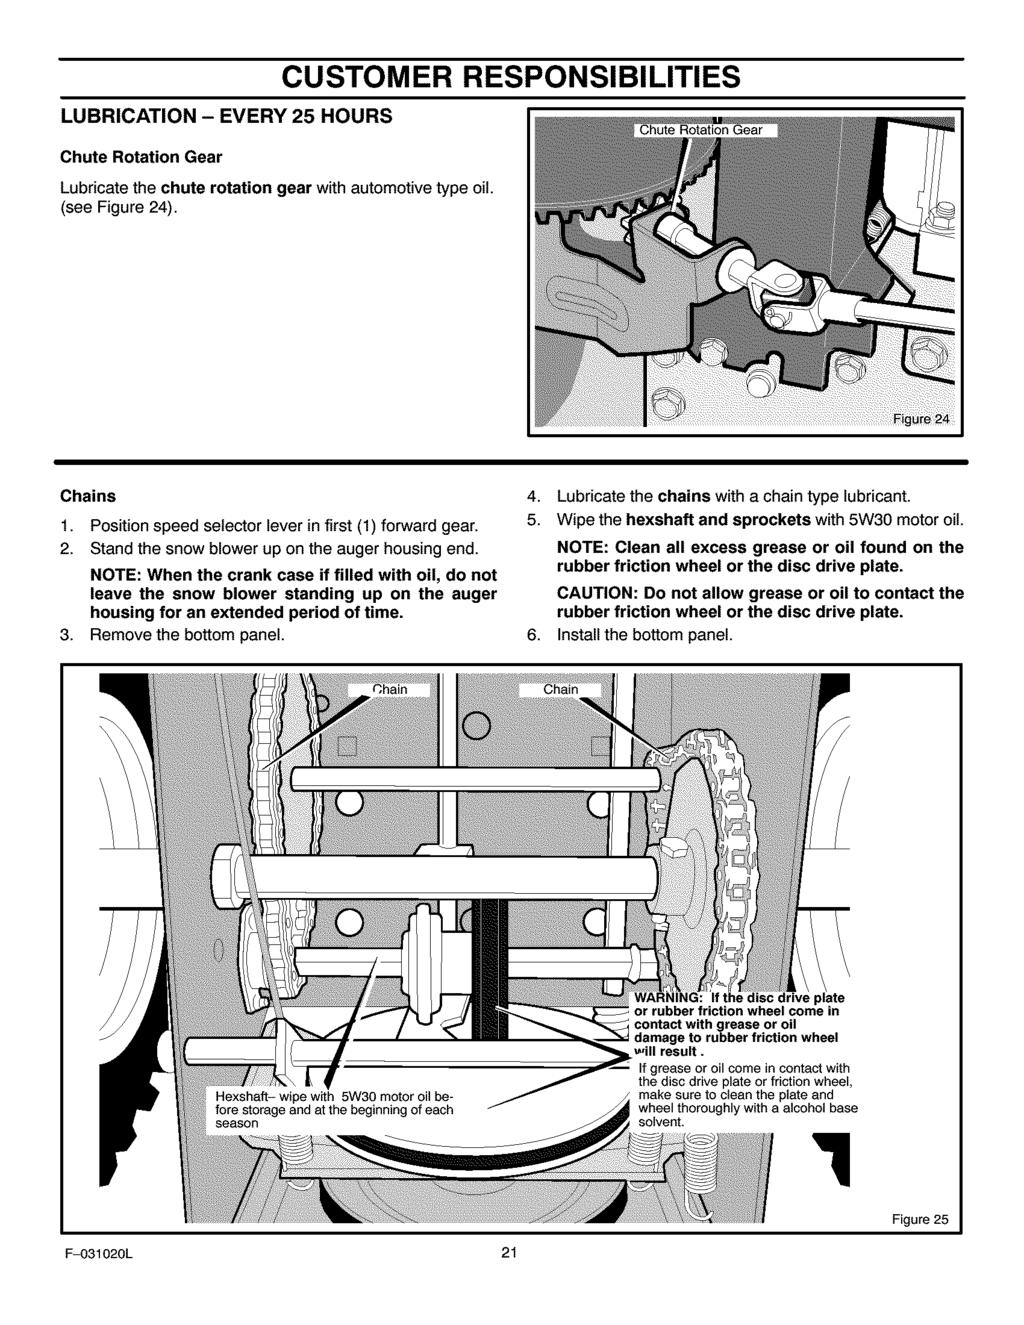 CUSTOMER RESPONSIBILITIES LUBRICATION - EVERY 25 HOURS Chute Rotation Gear Lubricate the chute rotation gear with automotive (see Figure 24). type oil. Chains 1.